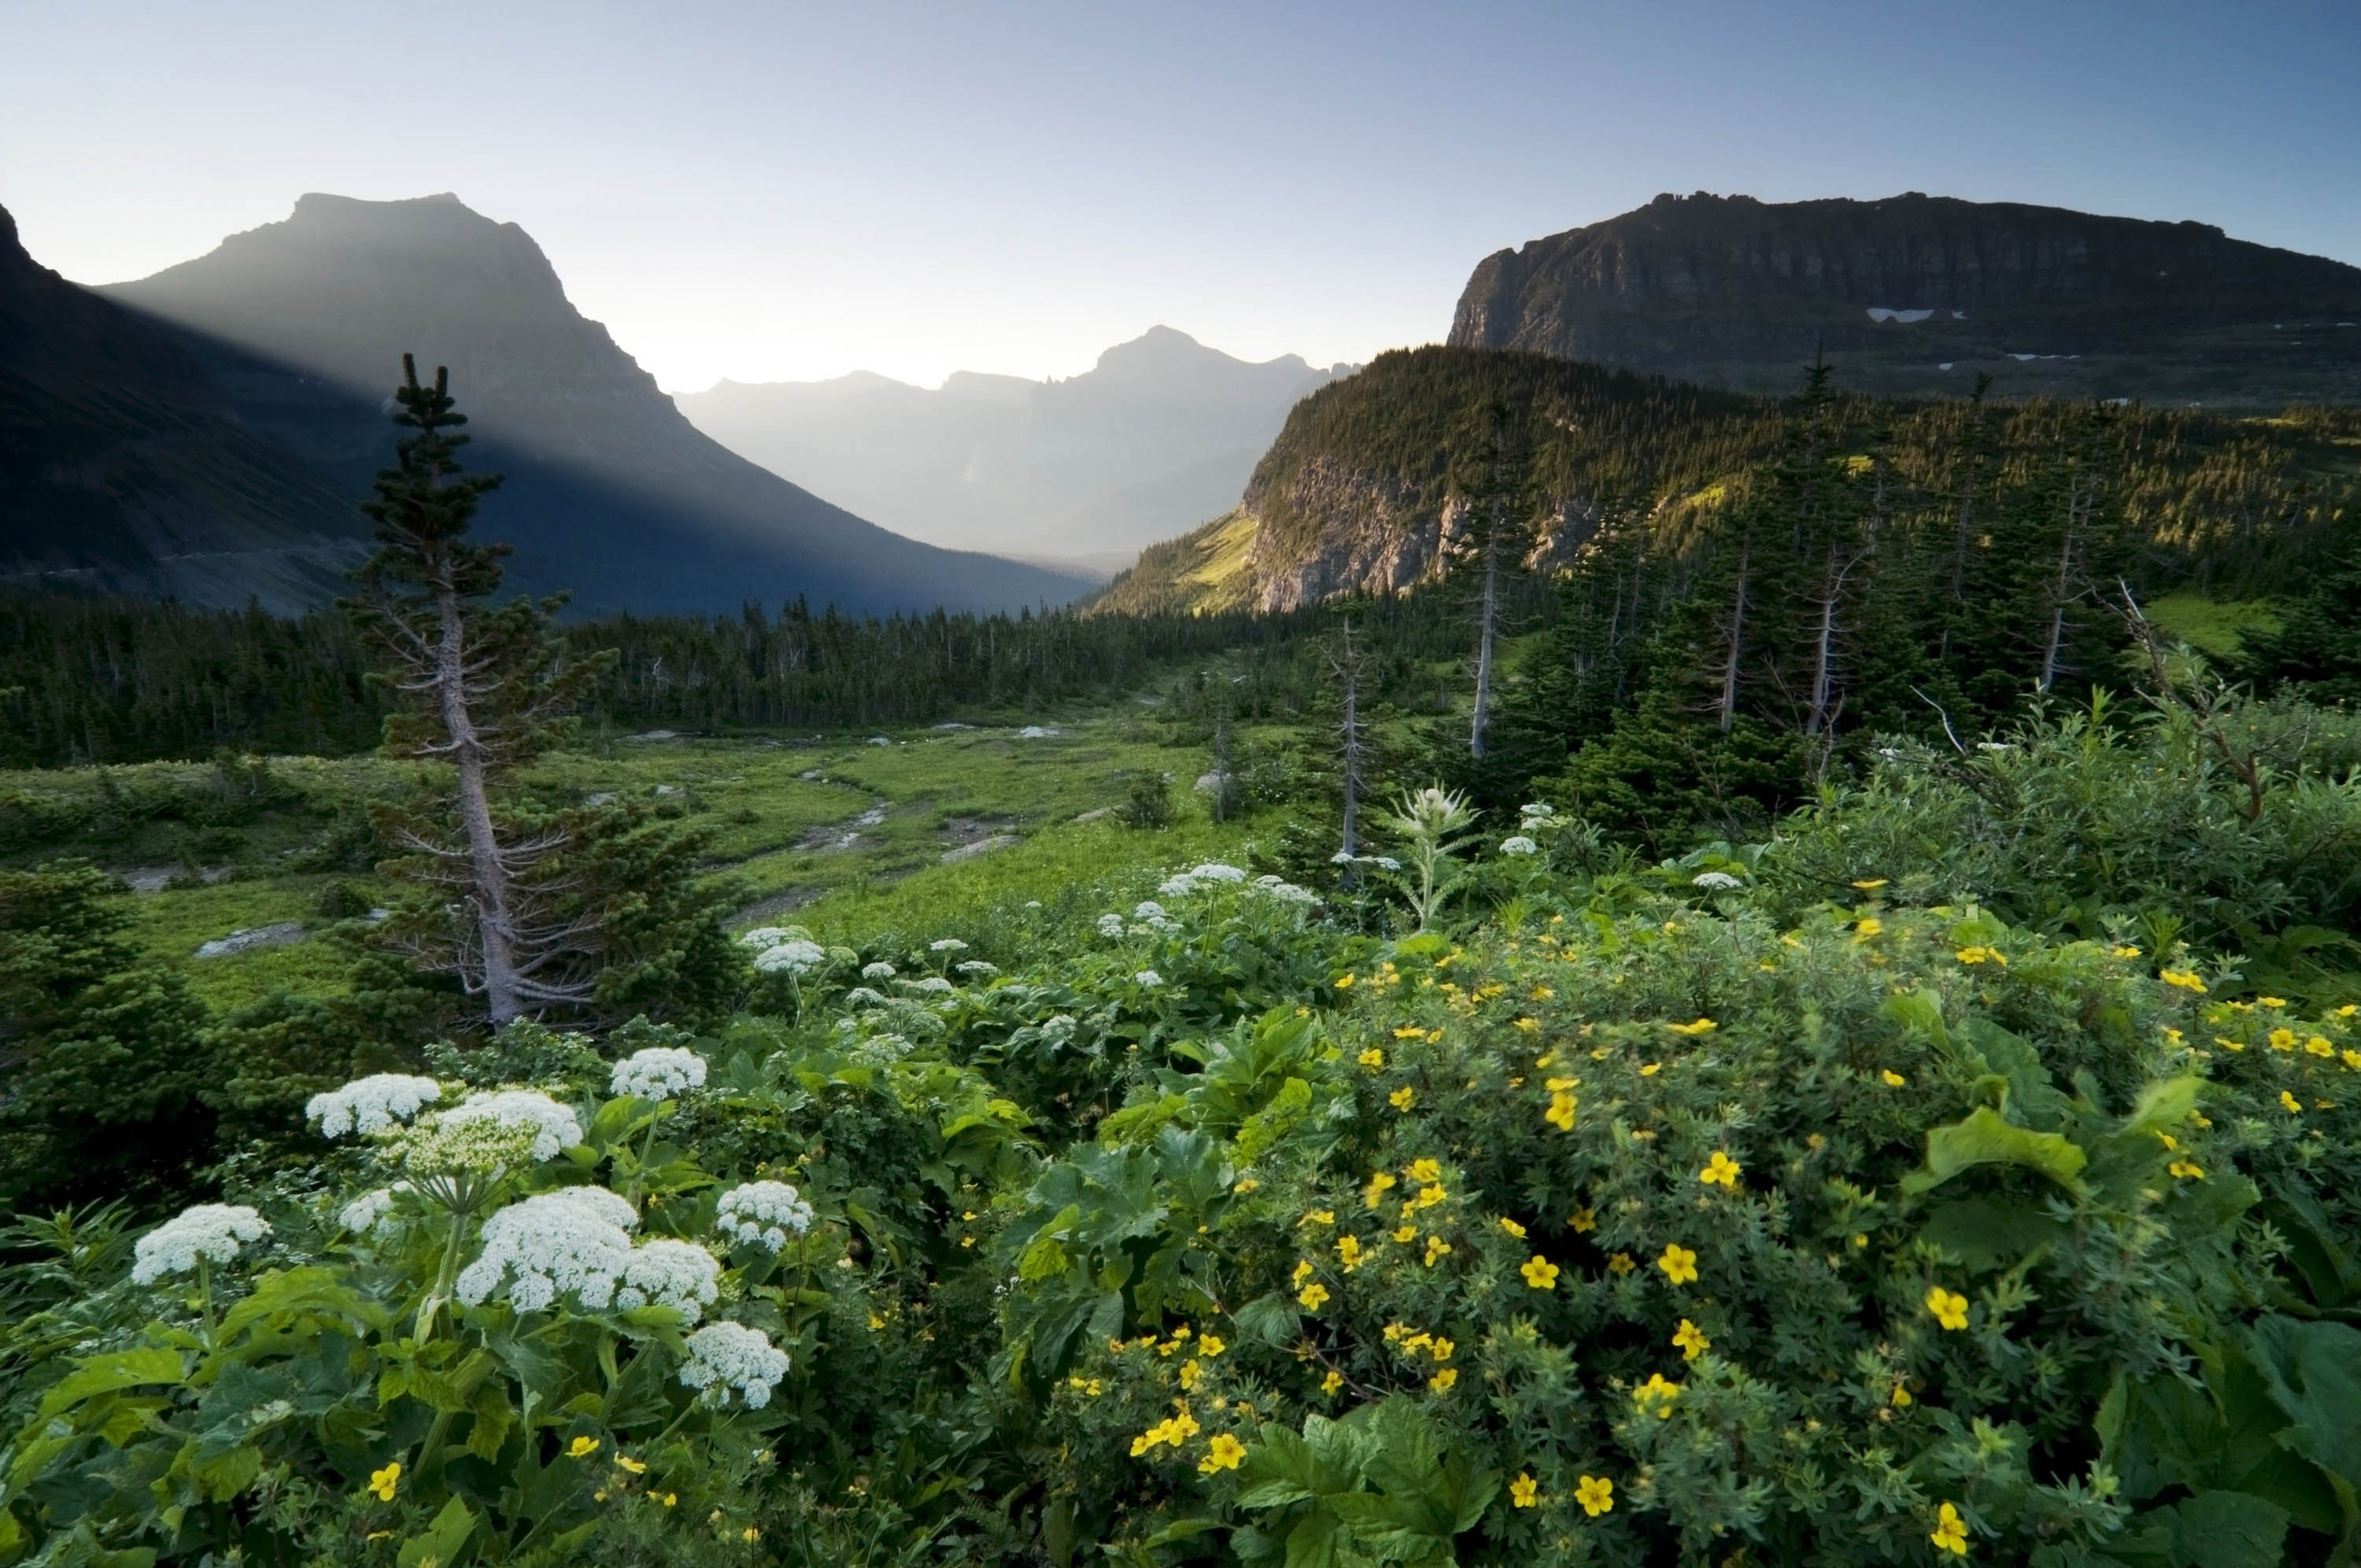 Logan Pass at sunrise in Glacier National Park along the Going-to-the-Sun Road.